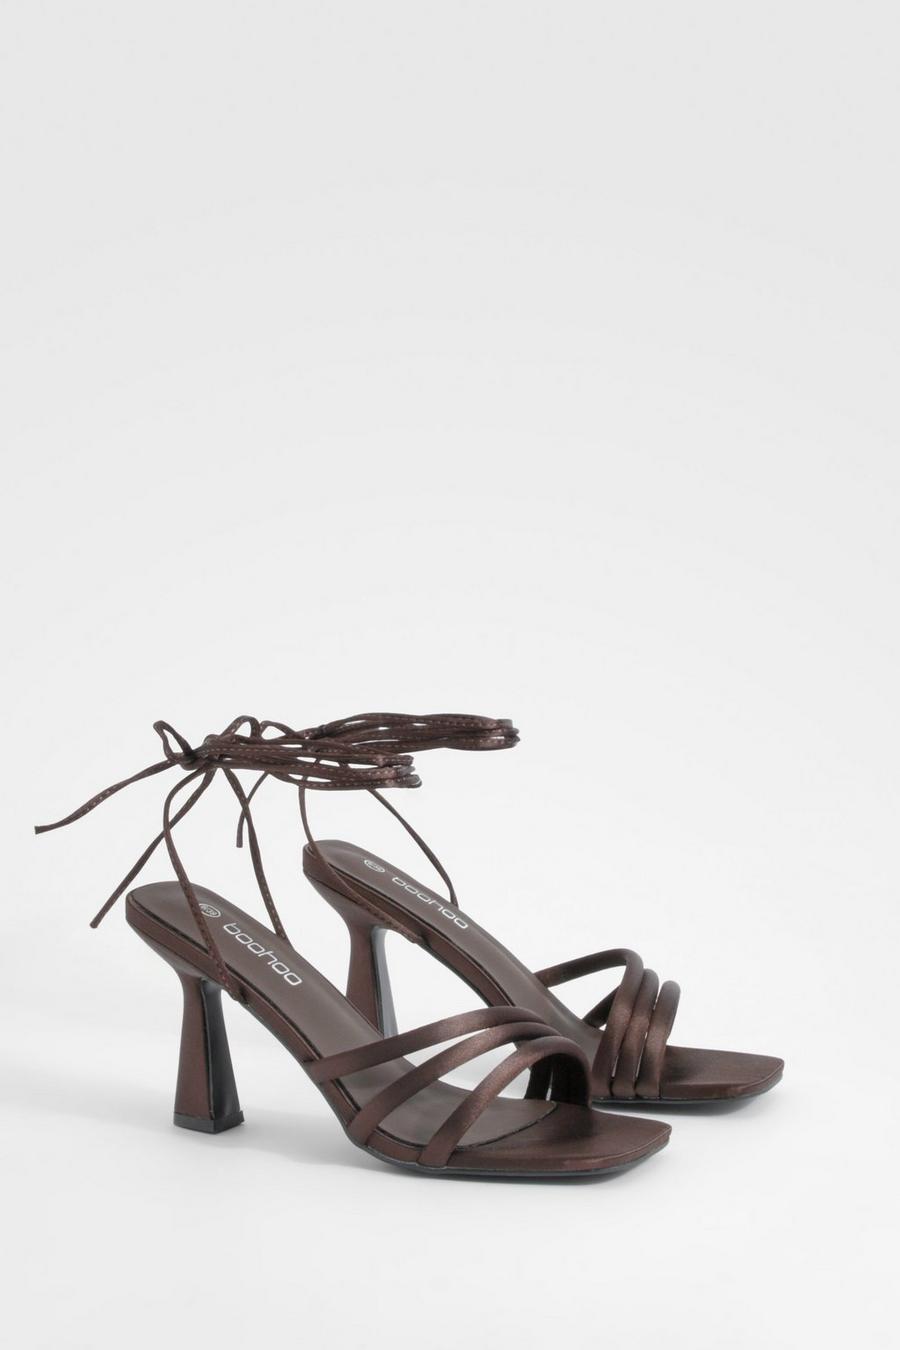 Chocolate Satin Padded Tie Up Strappy Heels image number 1